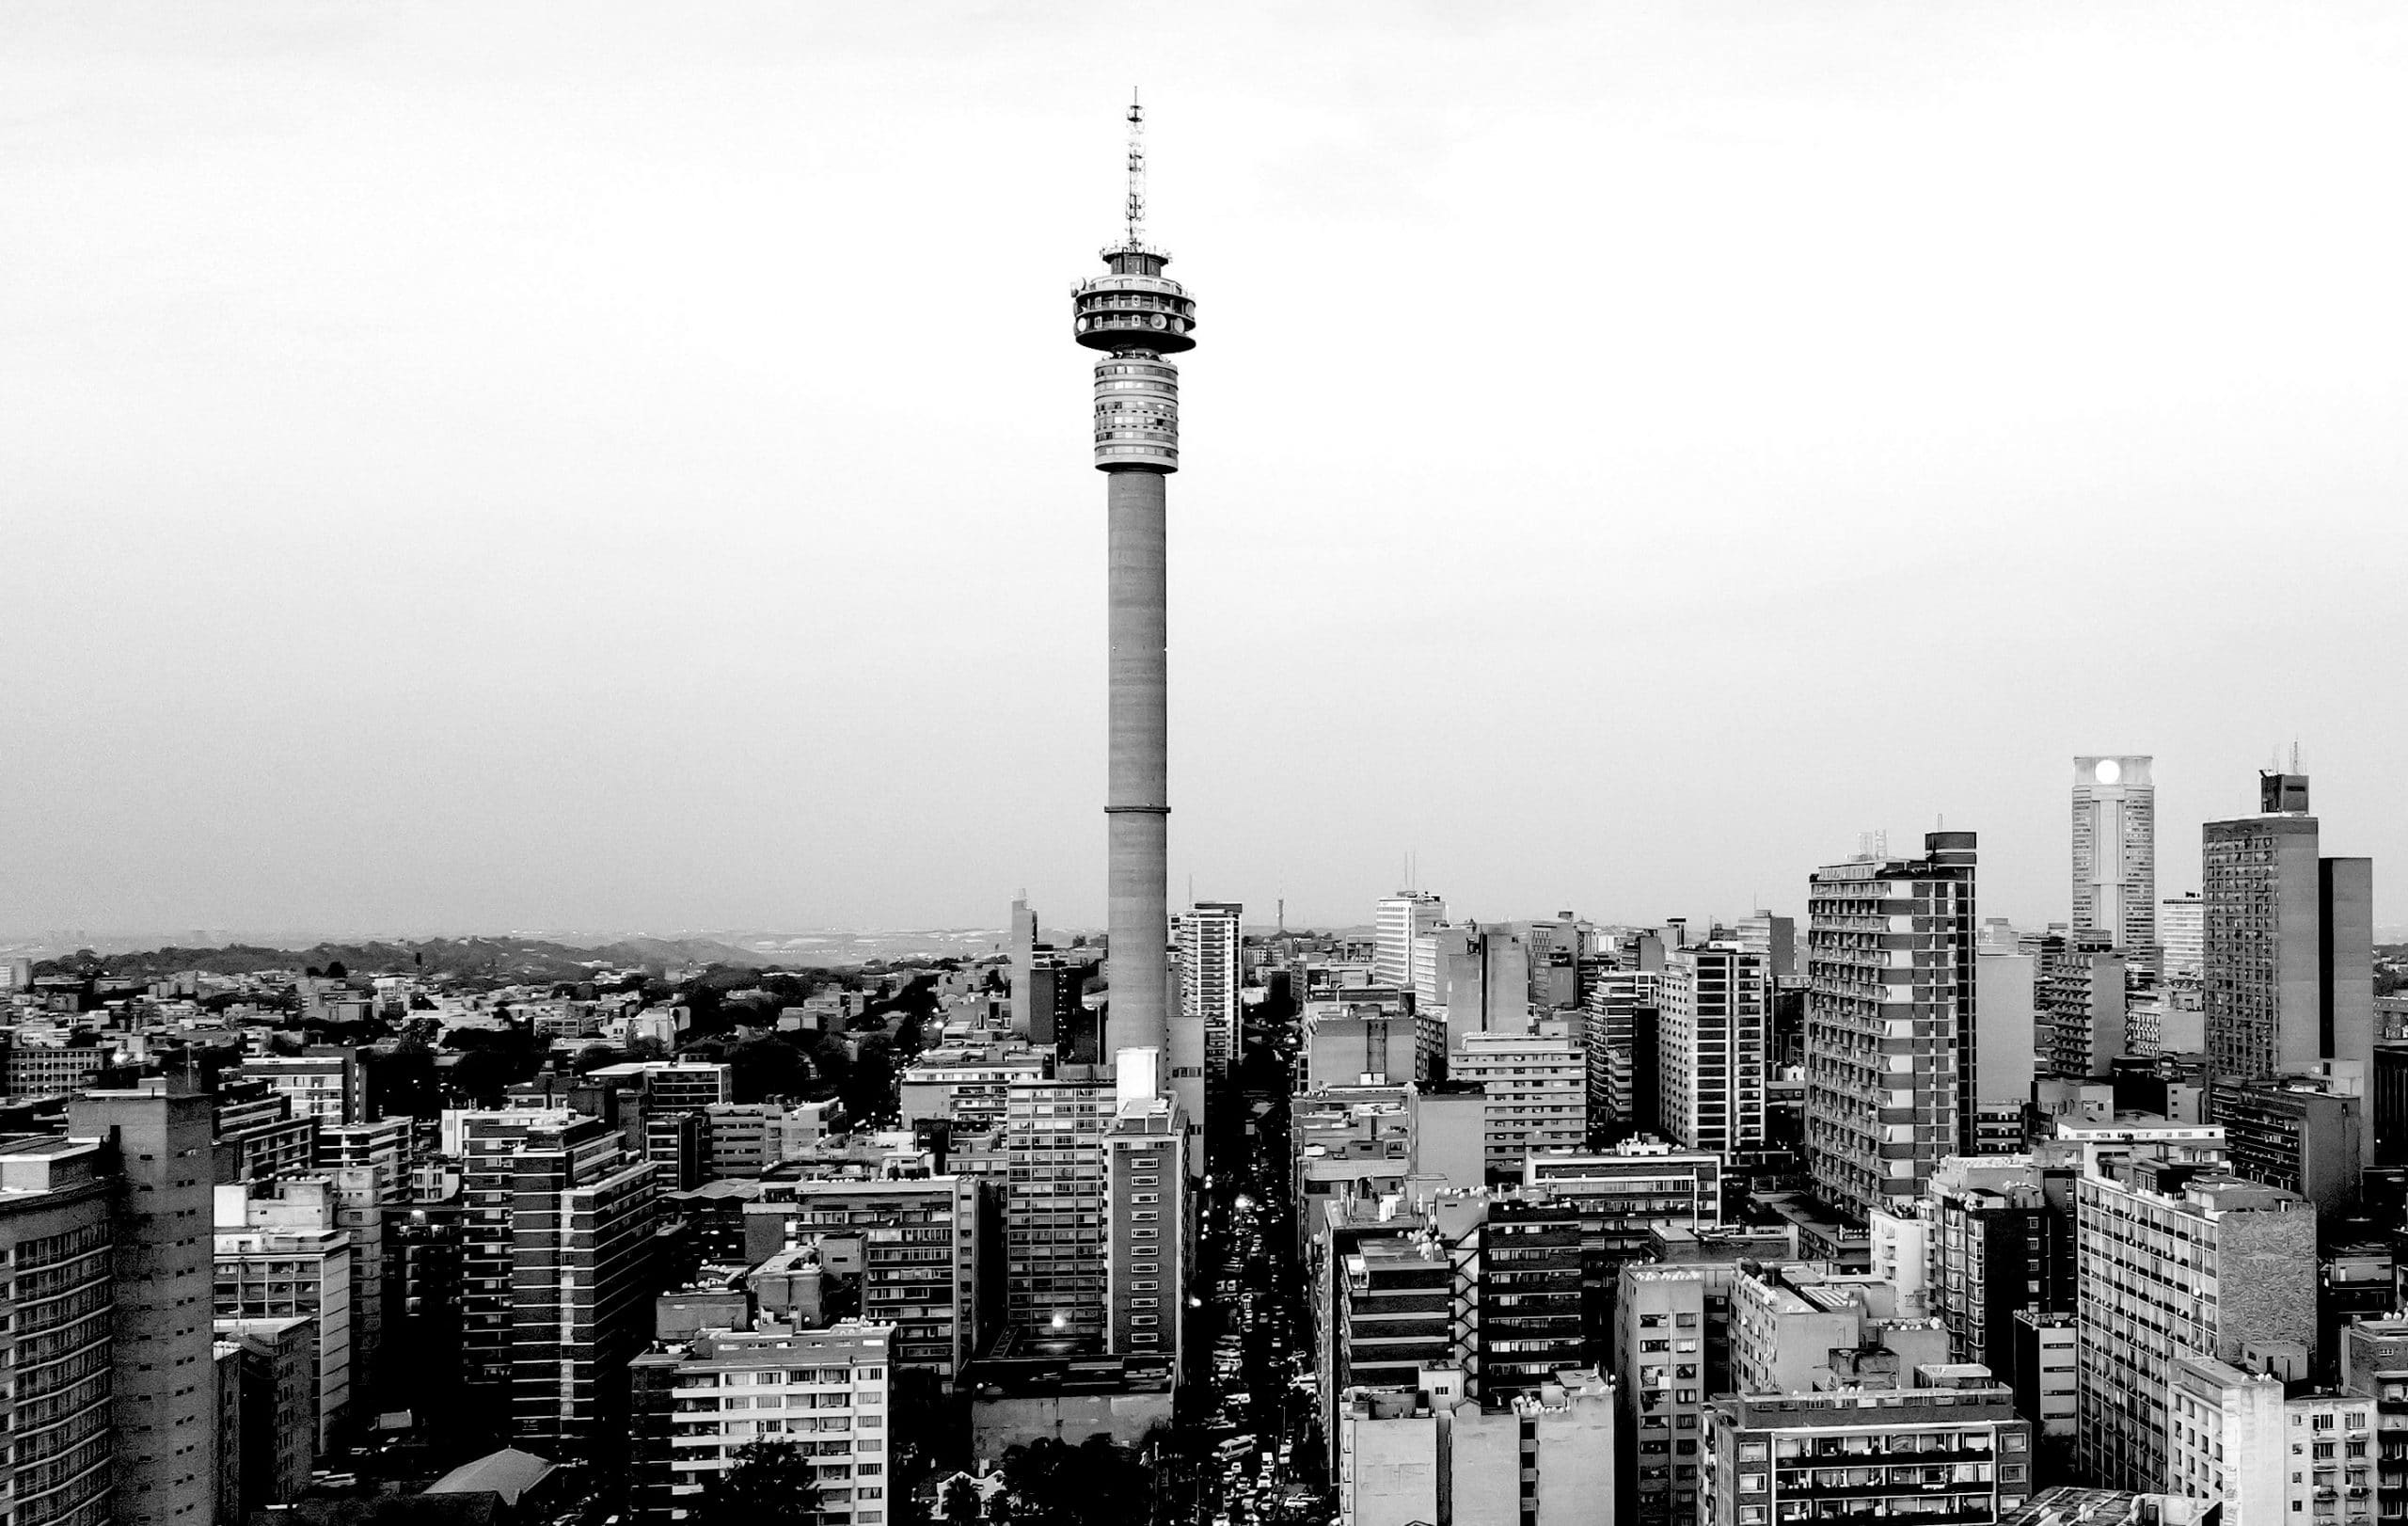 Johannesburg Skyline in black and white, overcast day with the Hilbrow Tower featured prominently in the center